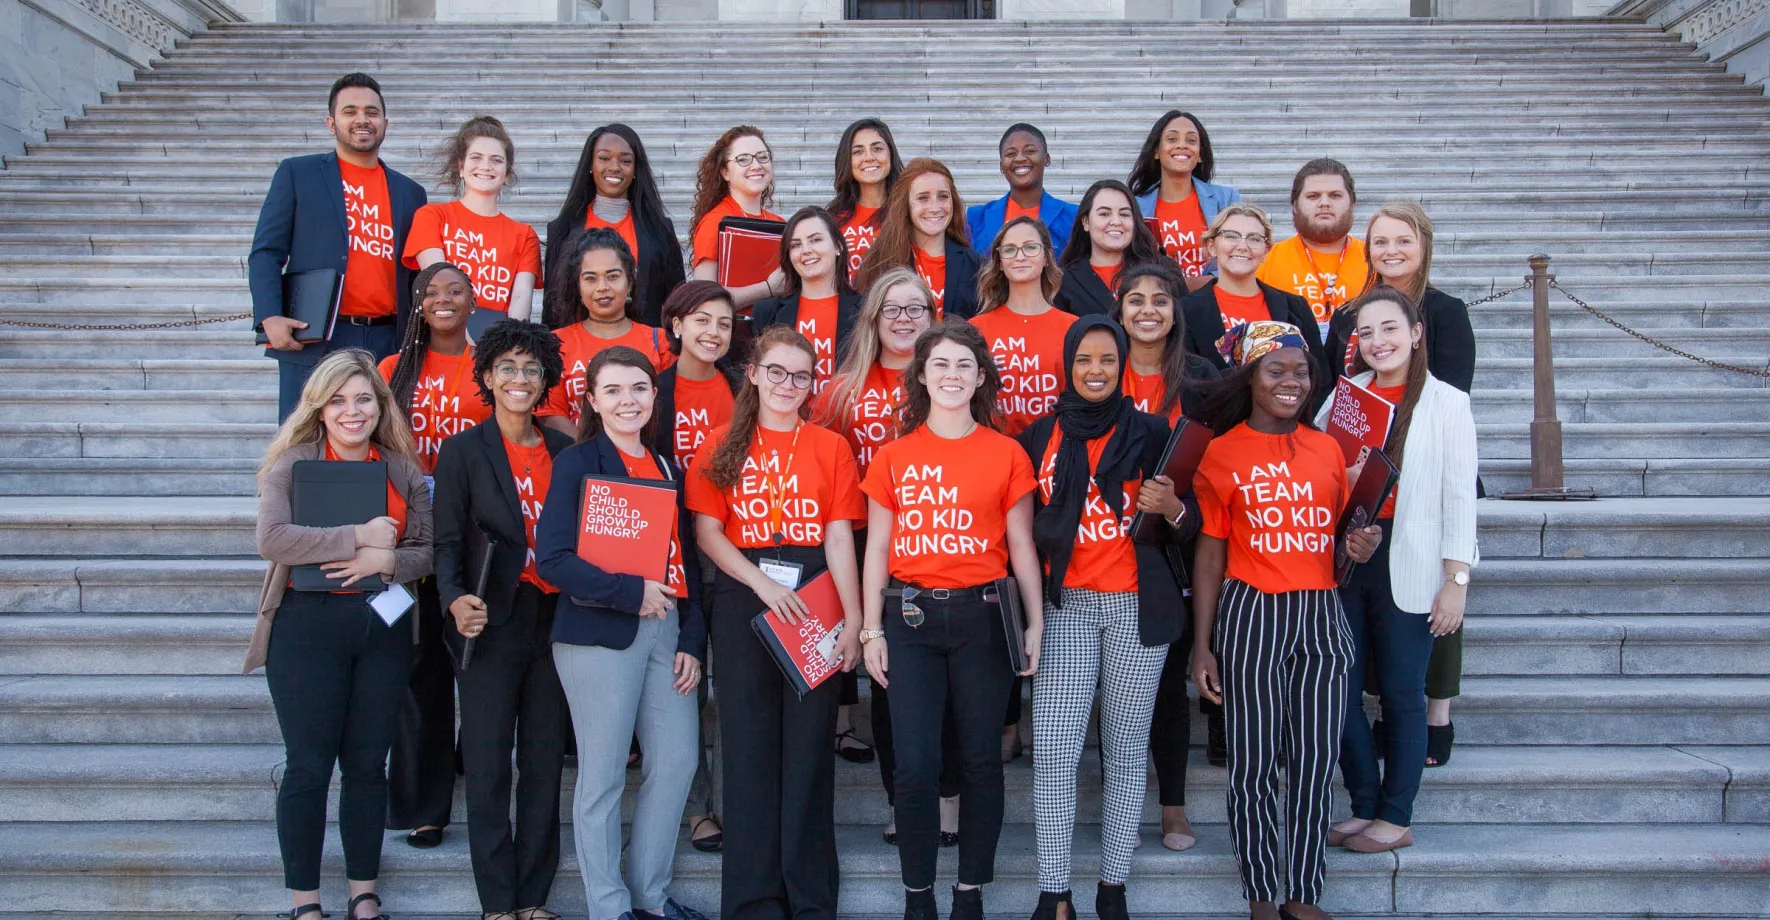 Summer 2019 No Kid Hungry Youth Ambassadors gathered on Capitol Hill.